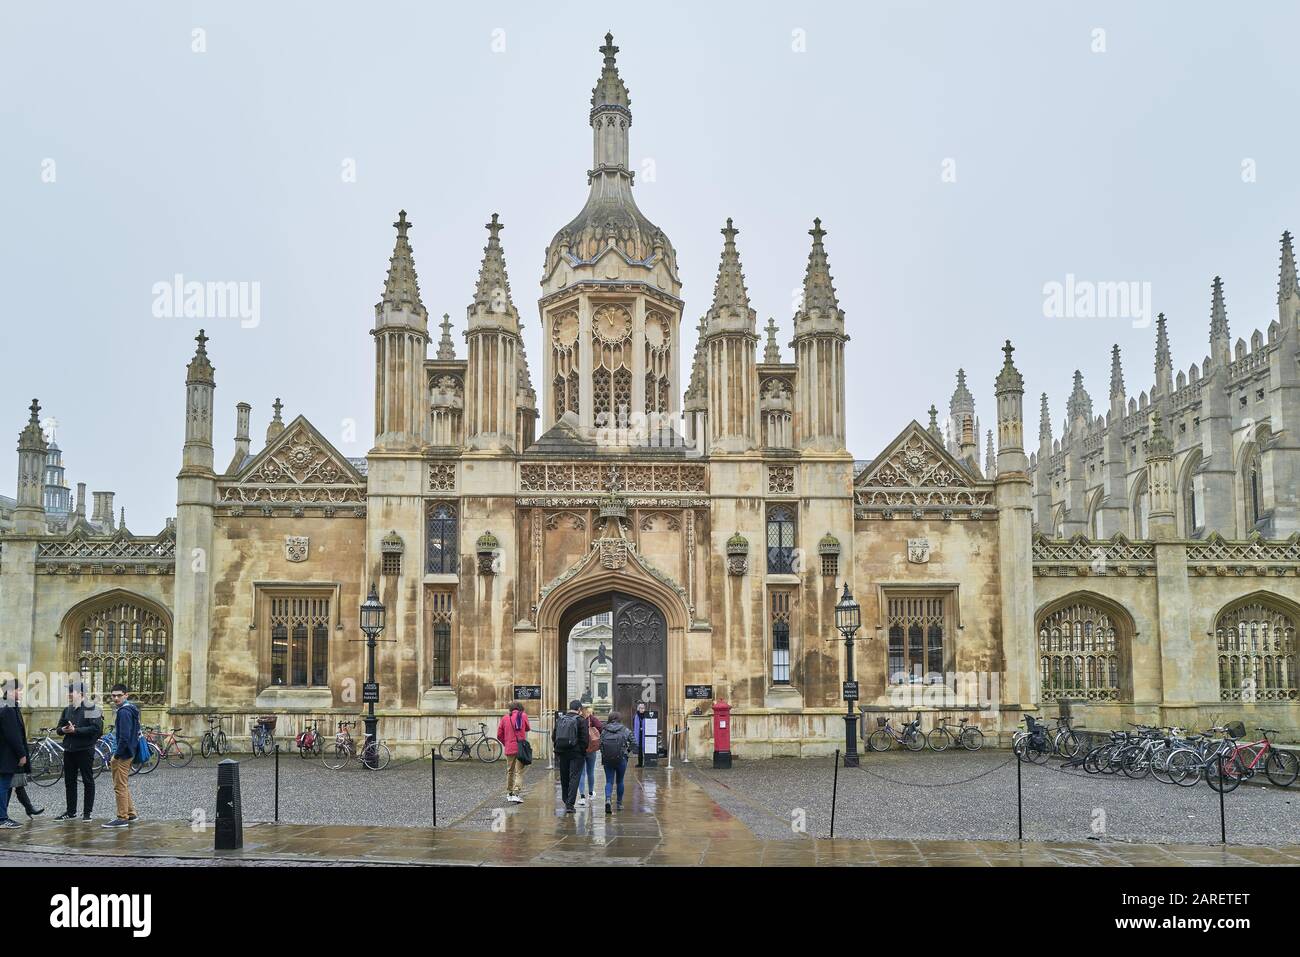 Ornate stone front facade and entrance to King's college, university of Cambridge, England, on a wet winter day. Stock Photo